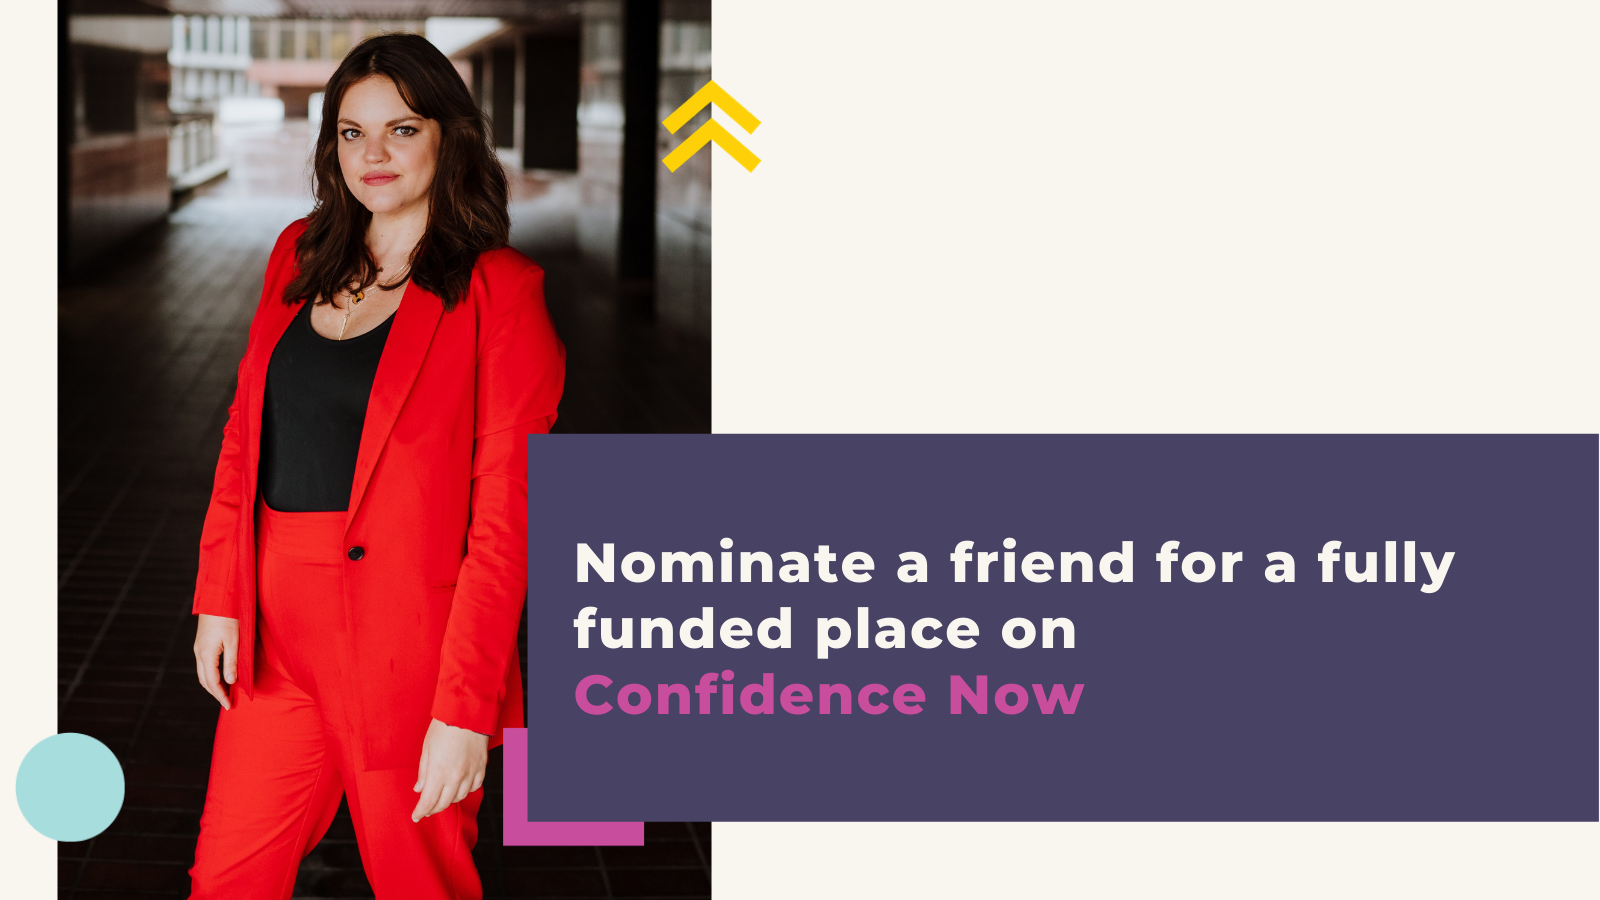 Nominate a friend for a fully funded place on Confidence Now